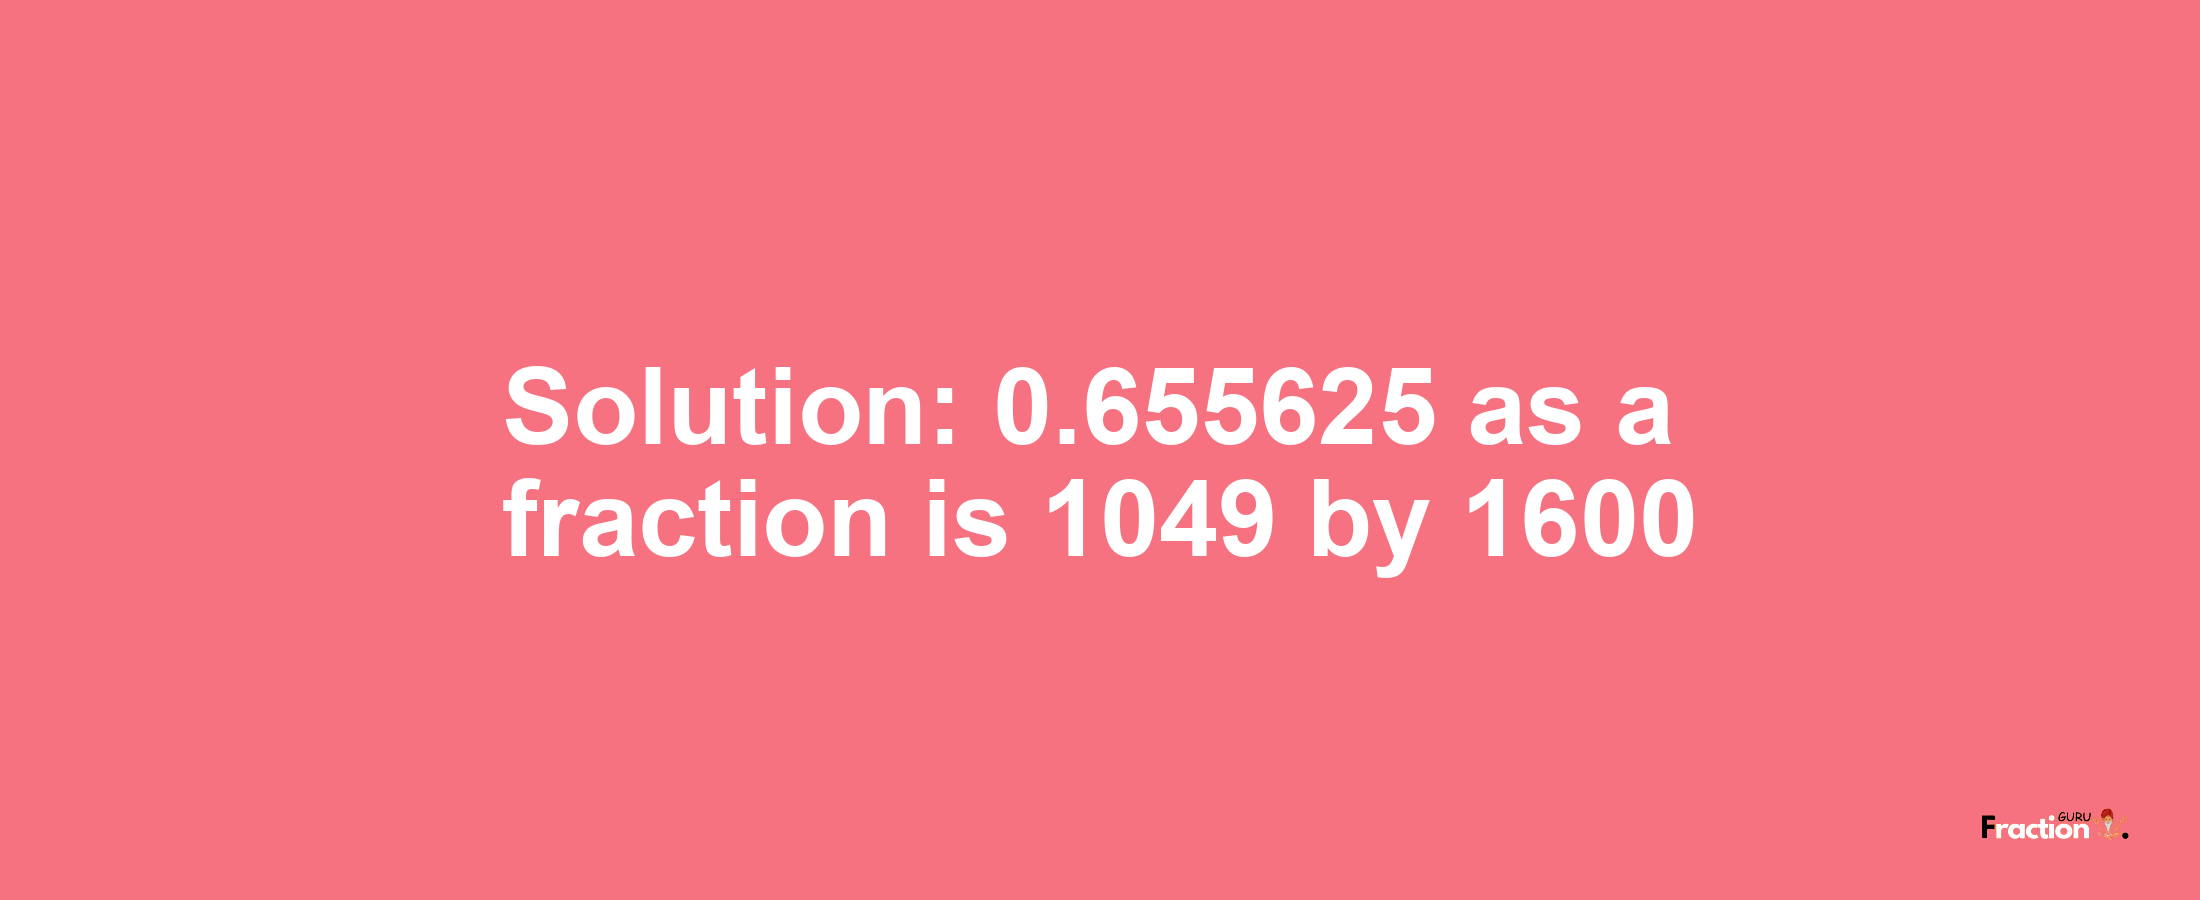 Solution:0.655625 as a fraction is 1049/1600